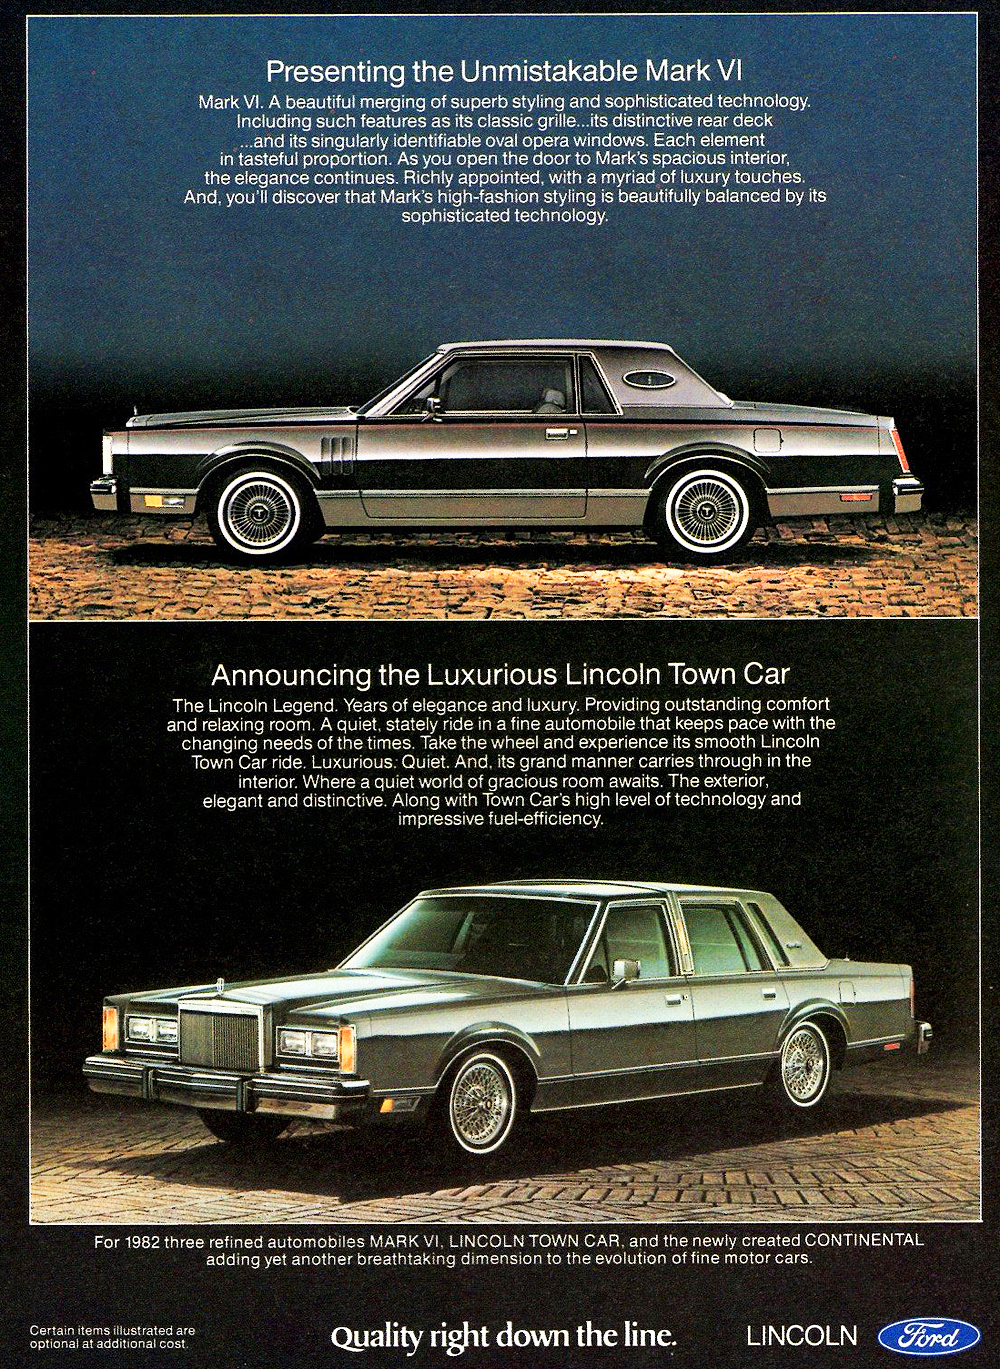 1982 Lincoln Town Car and Mark VI